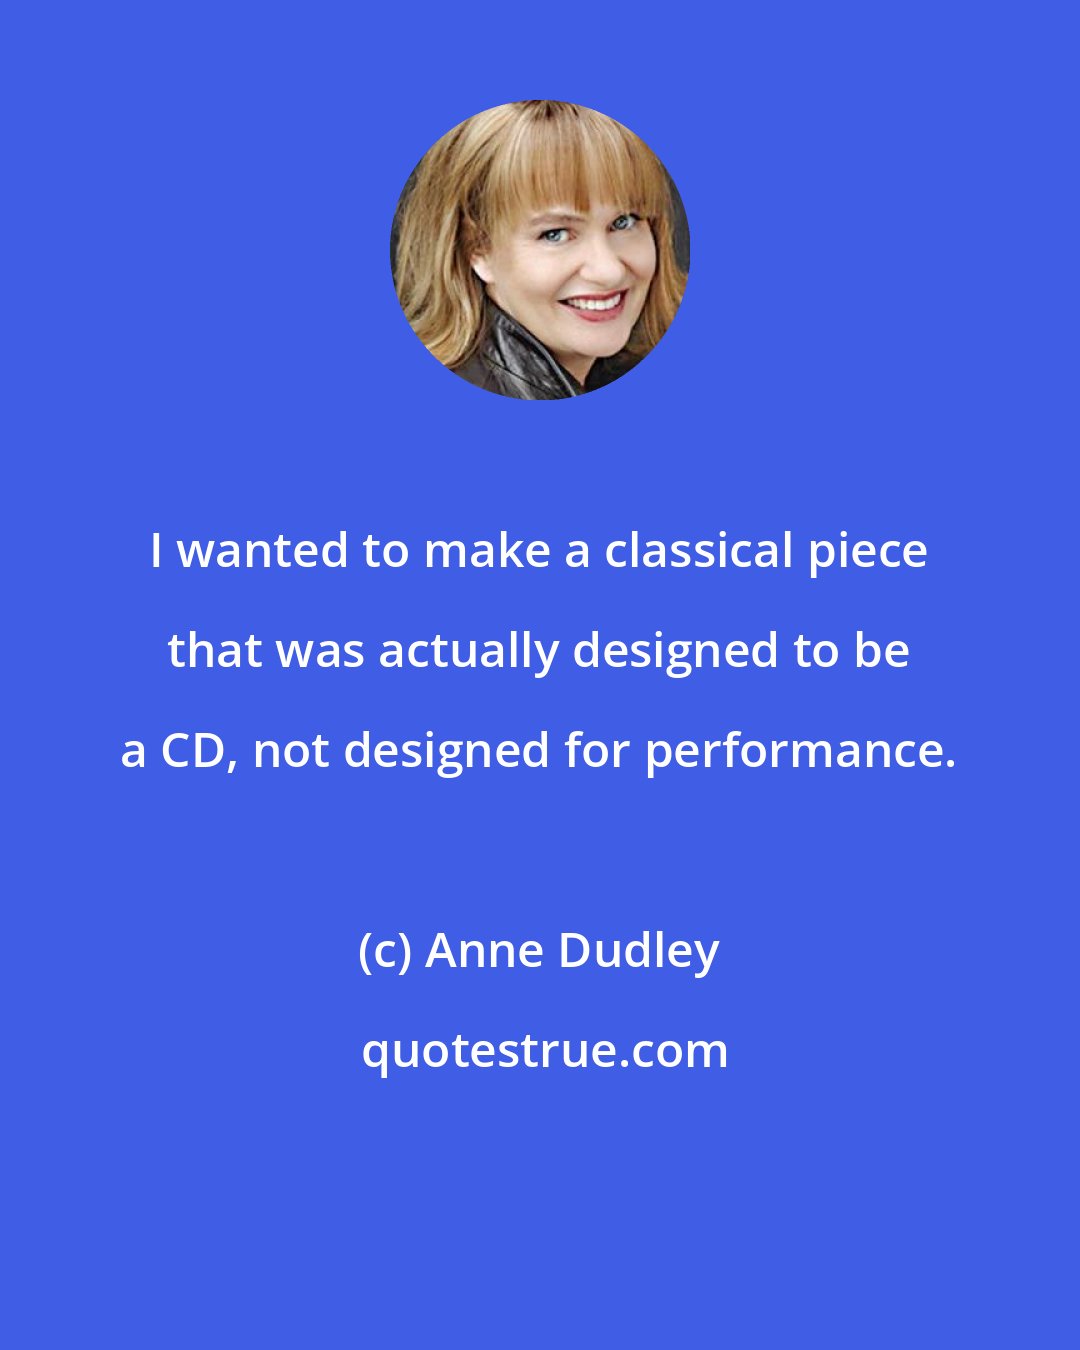 Anne Dudley: I wanted to make a classical piece that was actually designed to be a CD, not designed for performance.